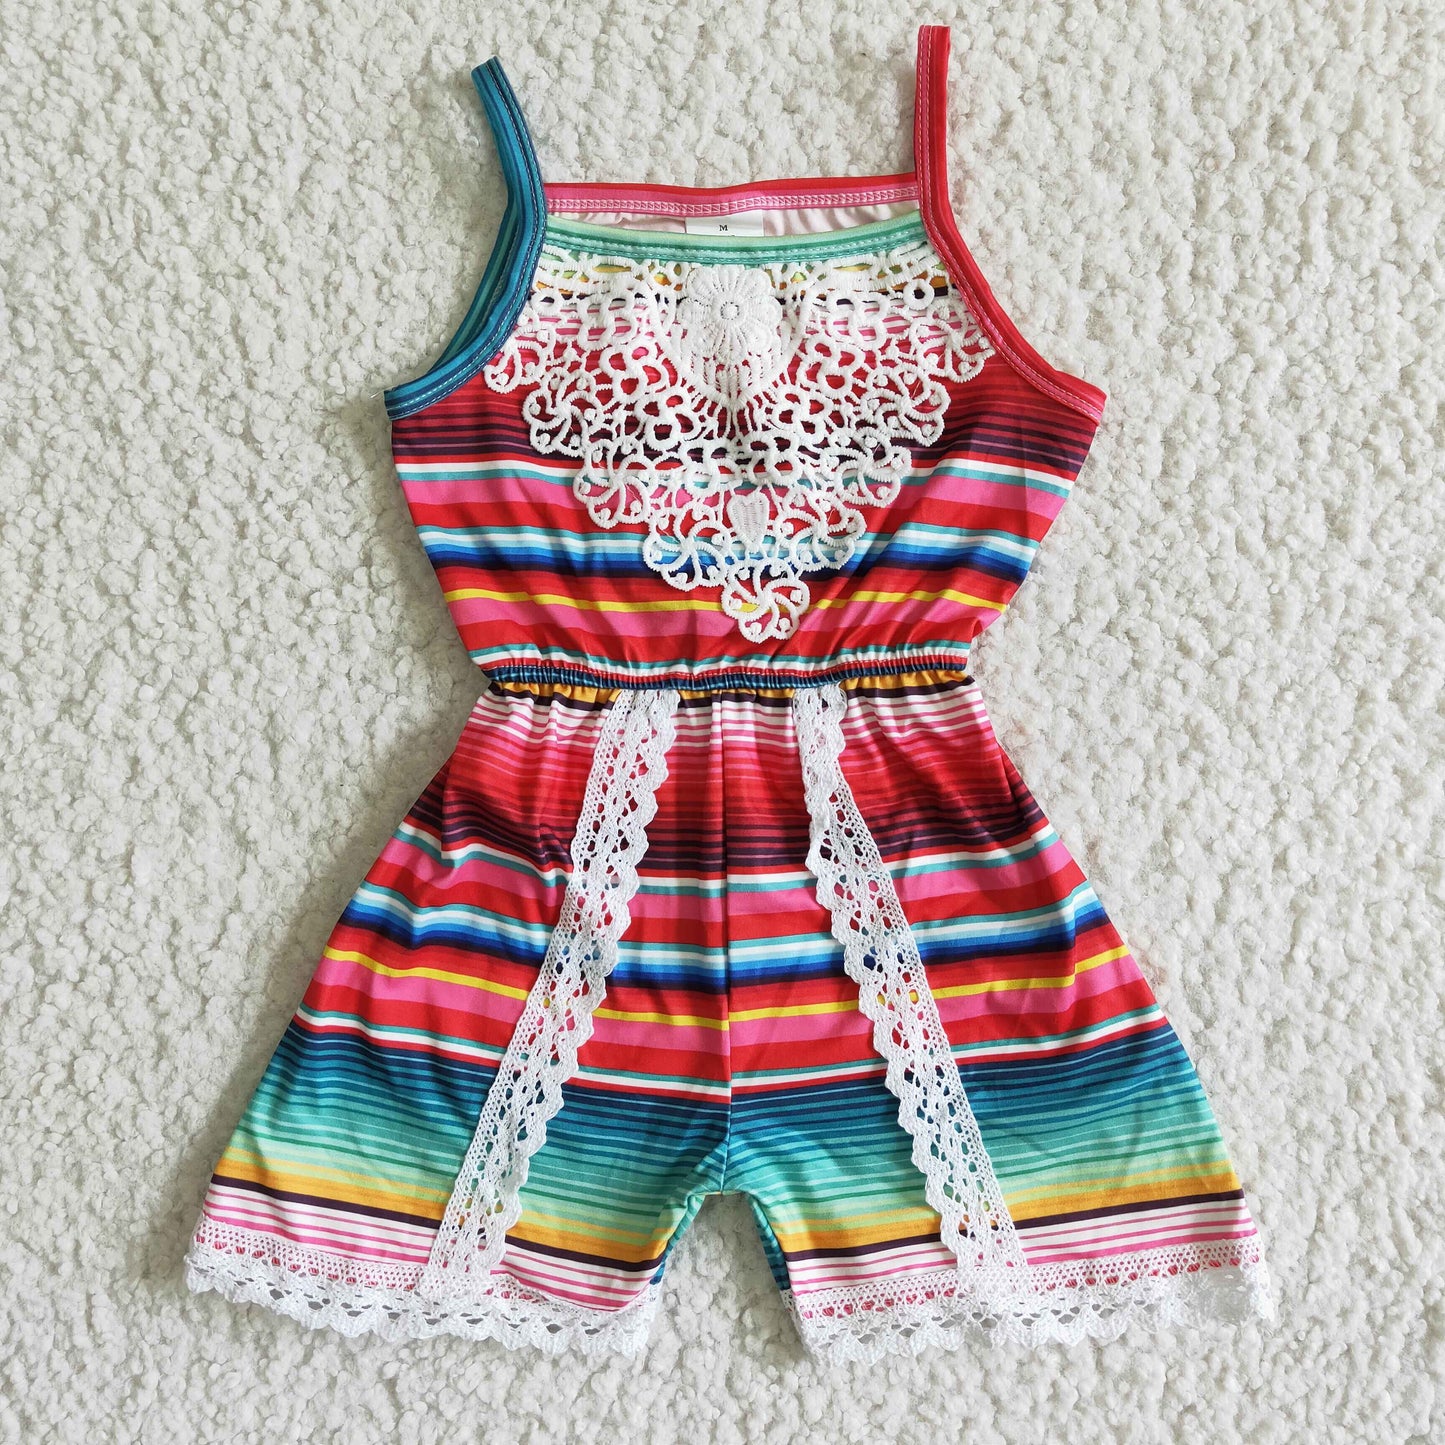 infants high quality lace jumpsuit girl fashion sleeveless elastic waist overalls